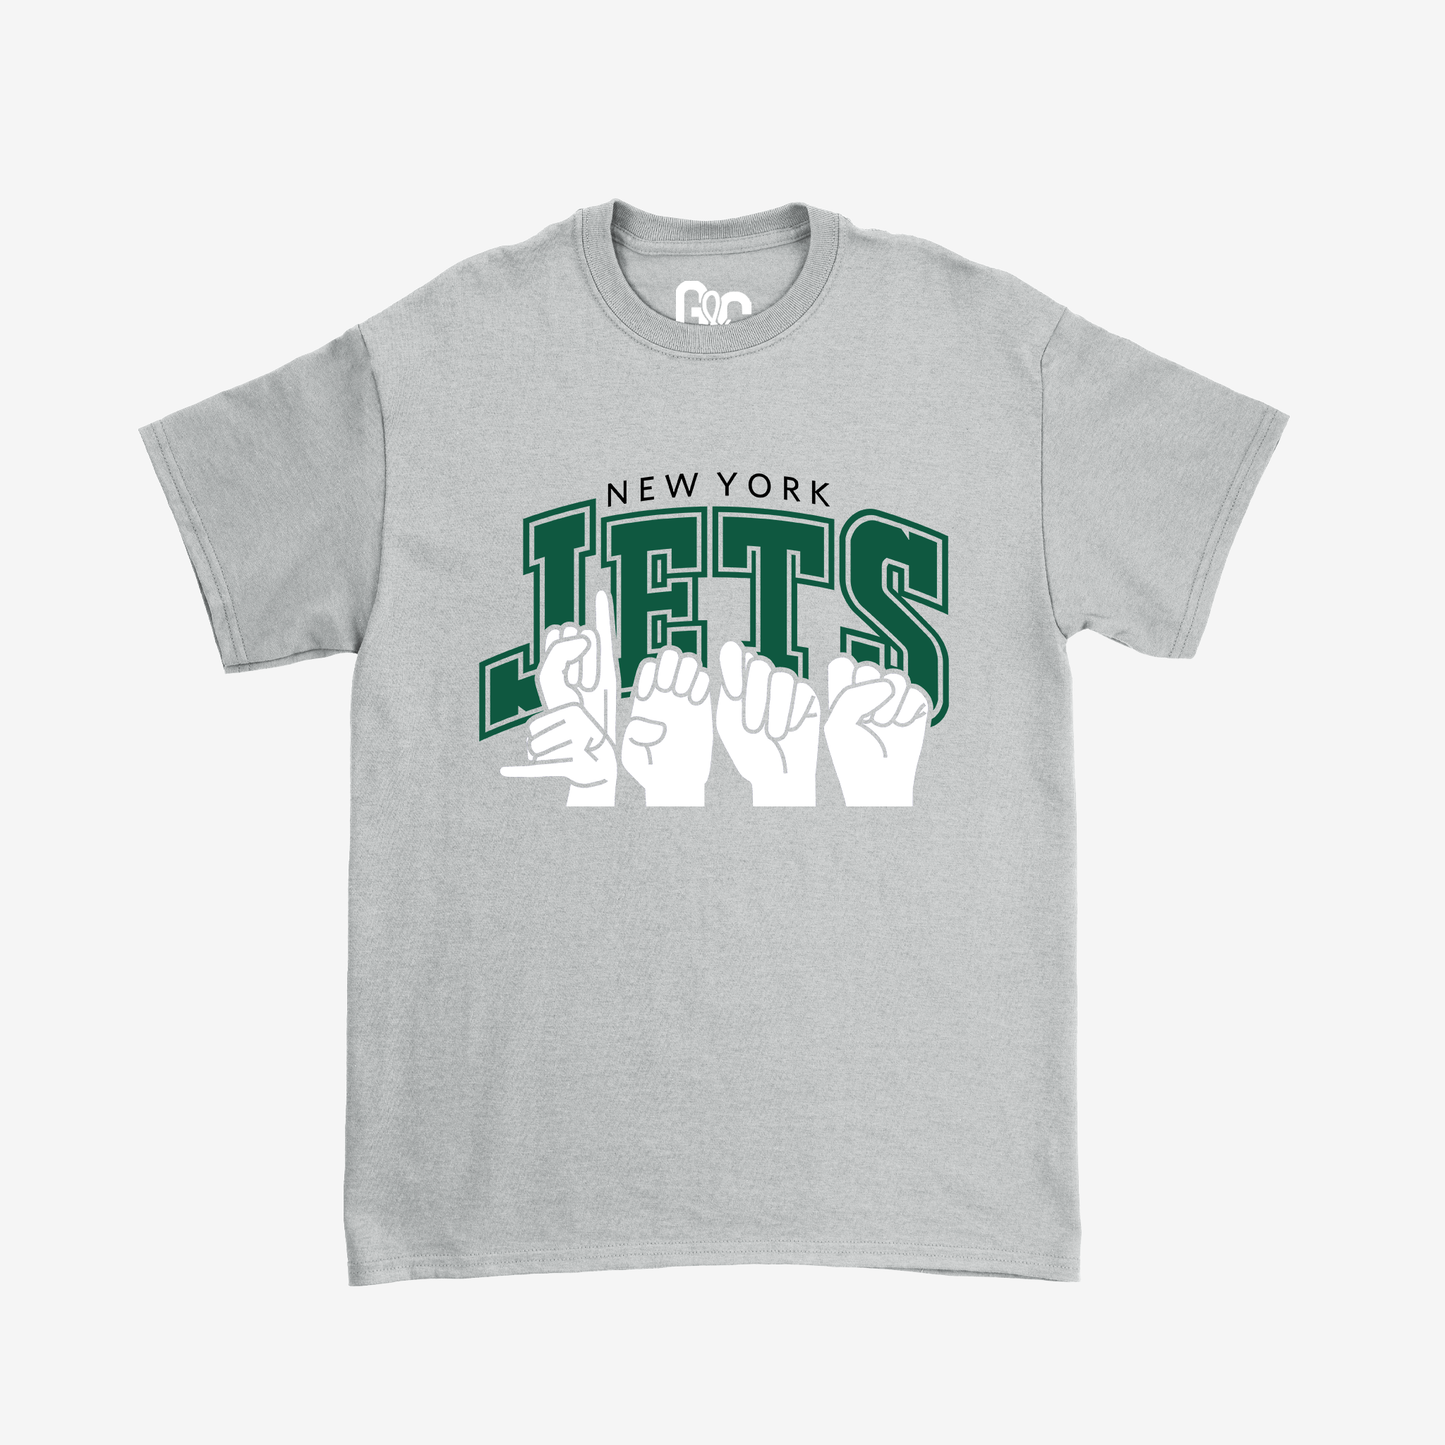 New York Jets Youth Tee